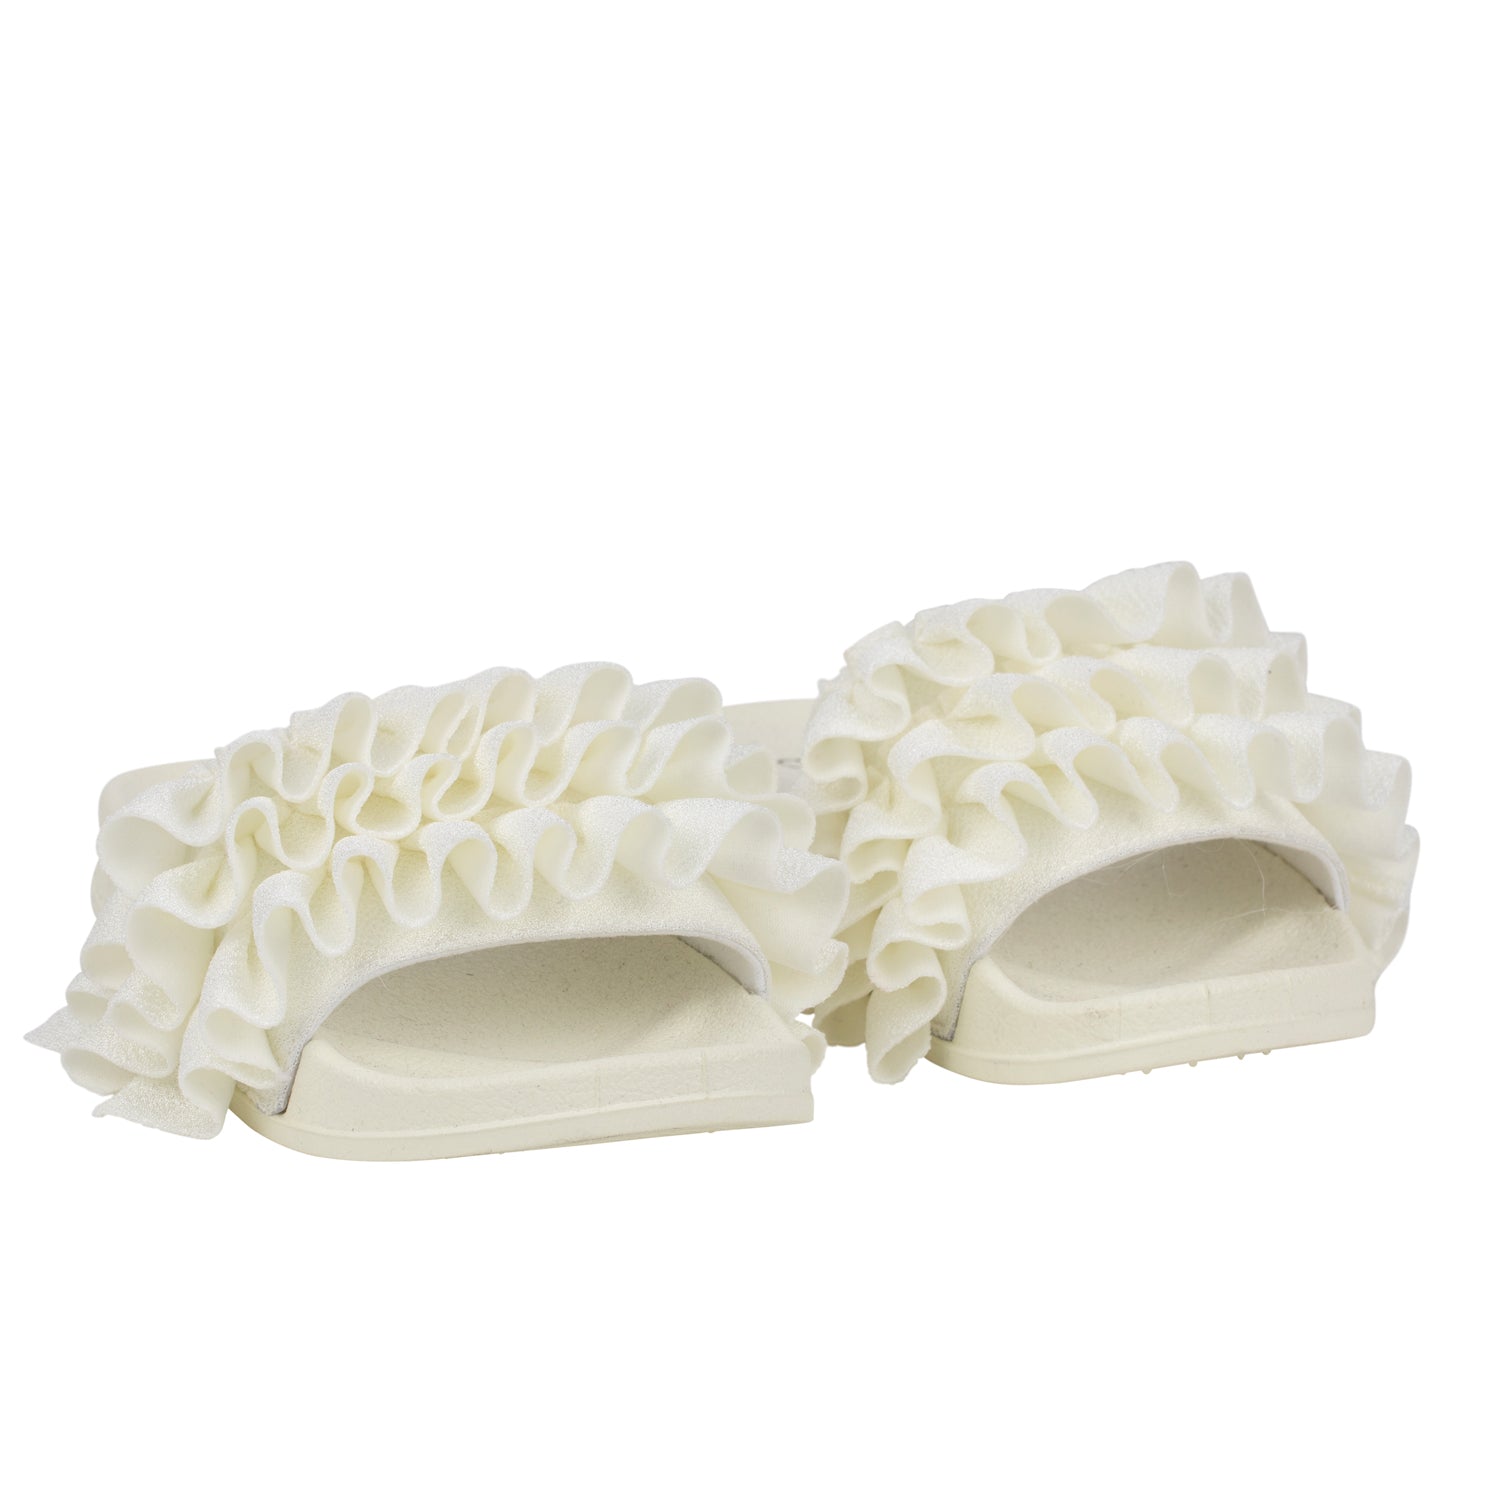 A DEE - Frilly Ocean Pearl Frill Slider - White